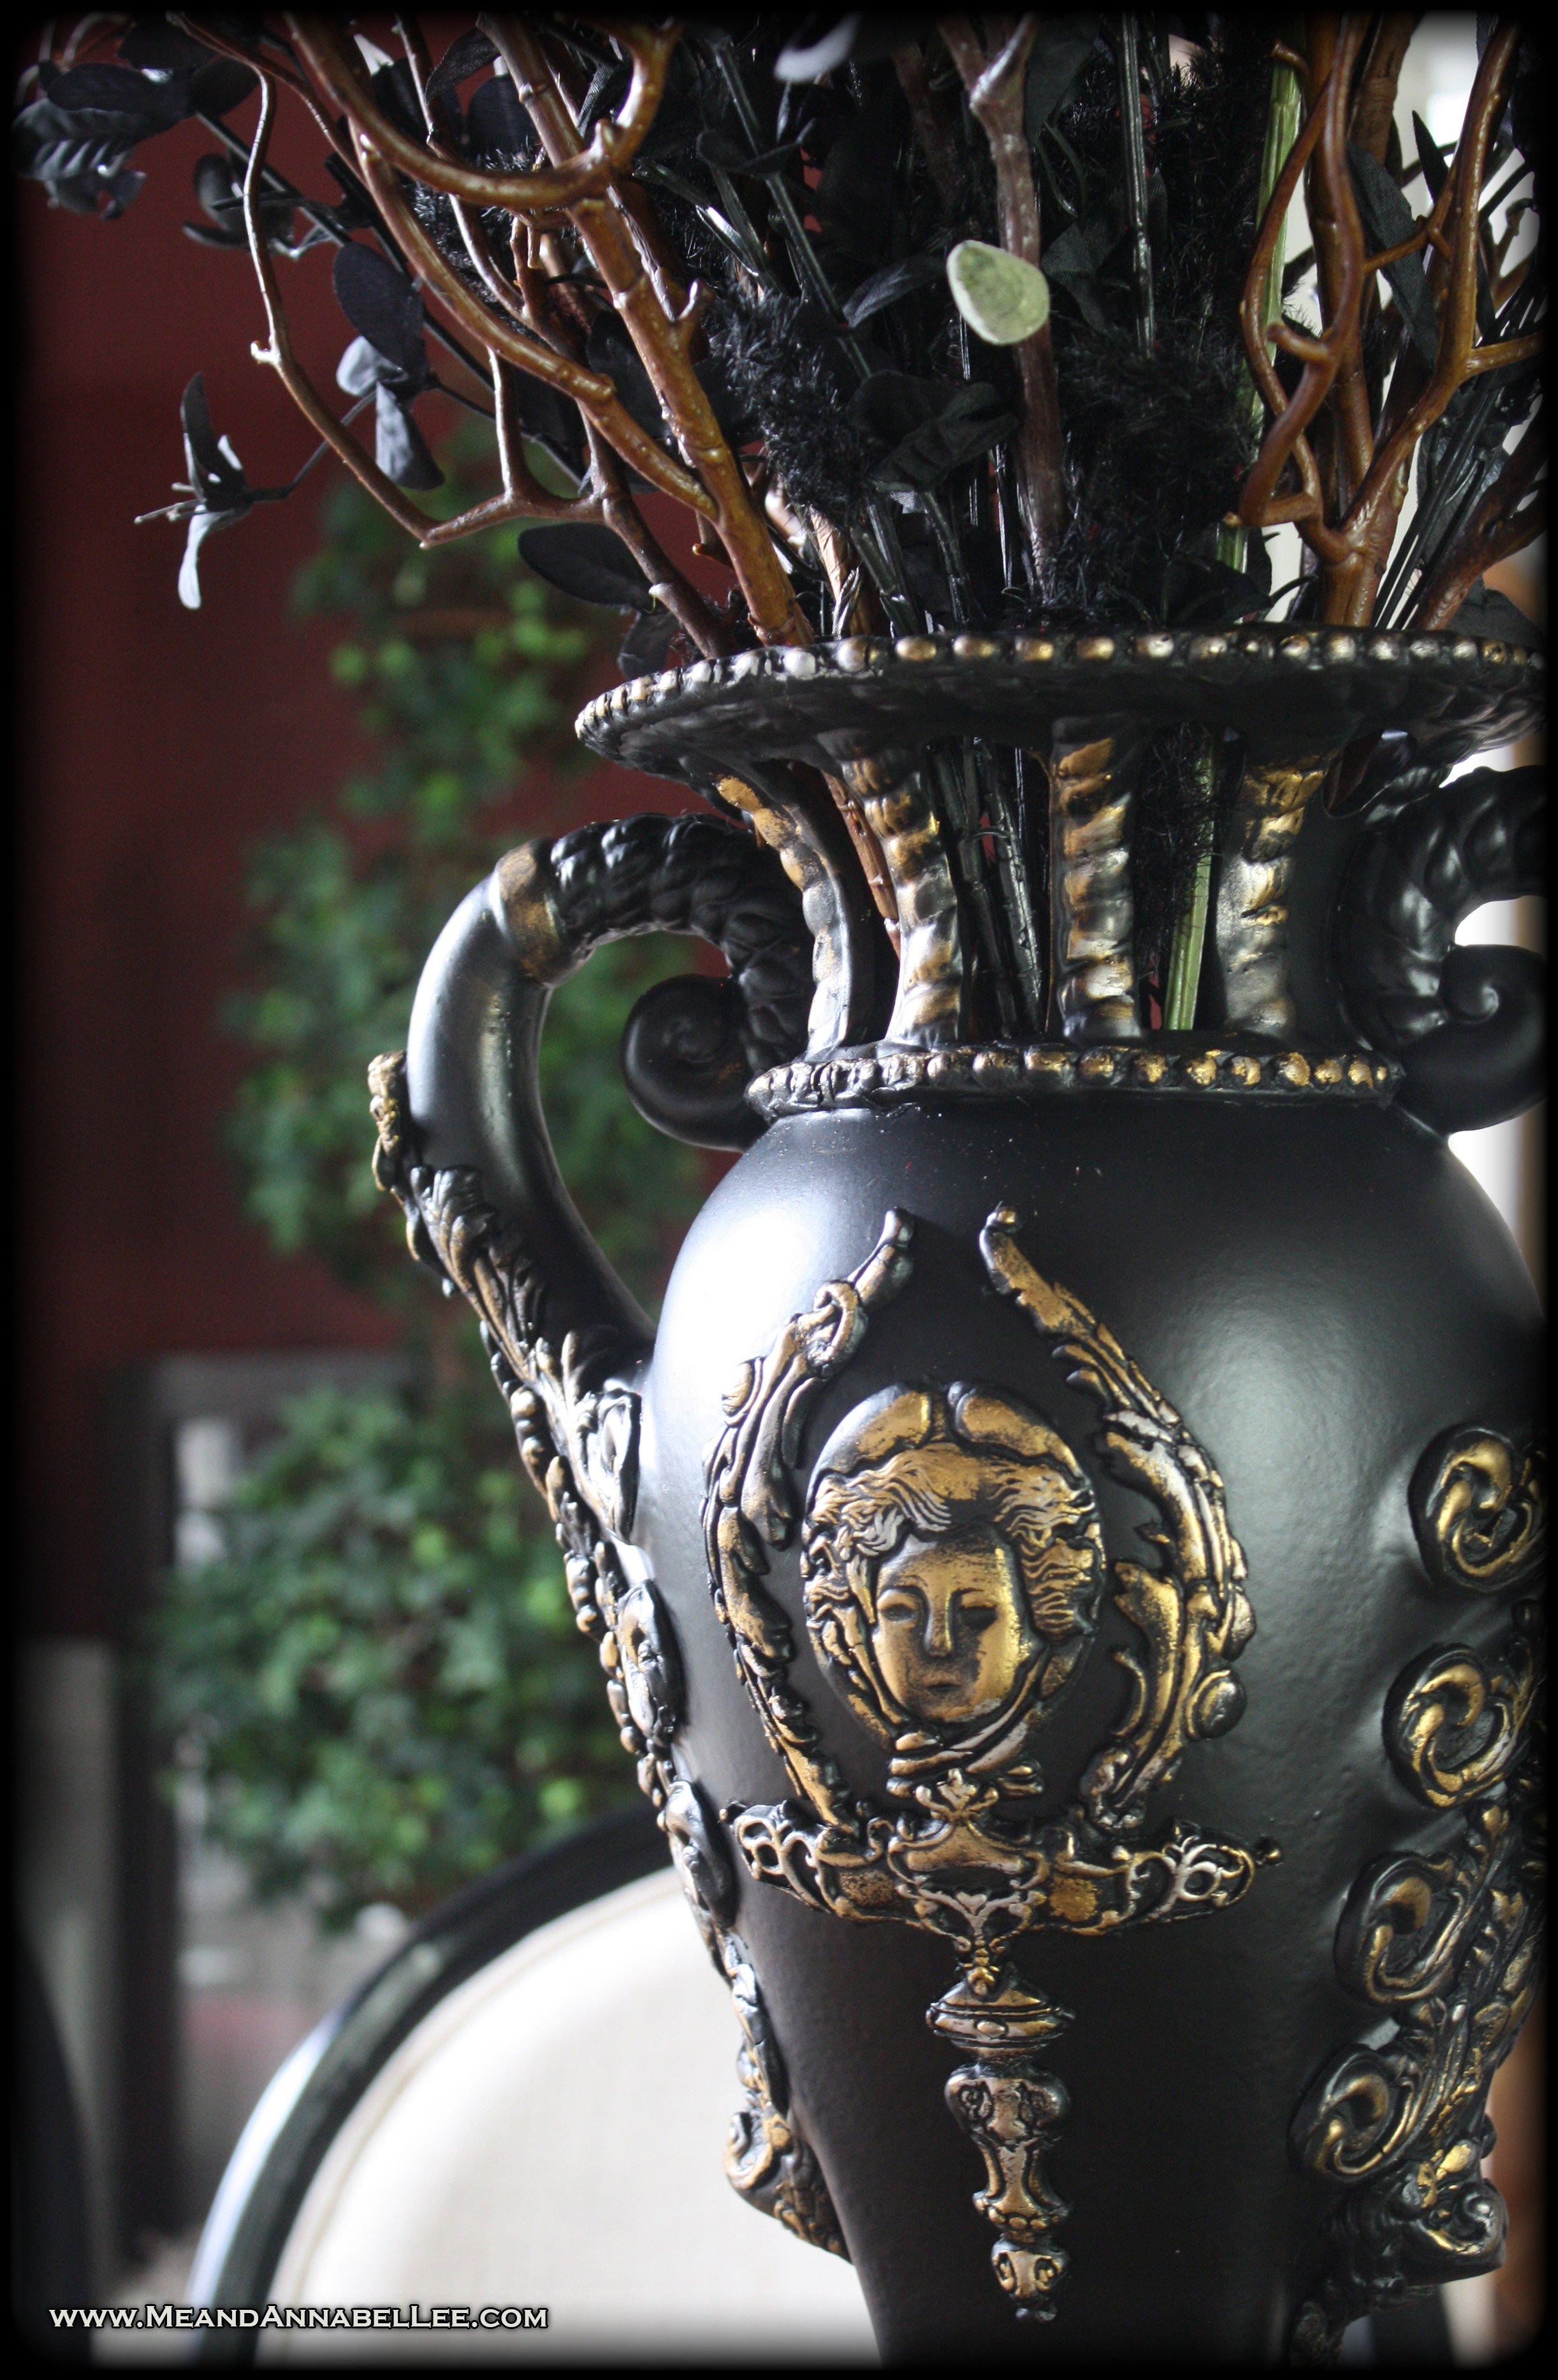 DIY Victorian Gothic Vase | Black & Gold | How to transform a thrift store vase using Iron Orchid Molds: Baroque, Escutcheon, Nautica, Mouldings, and Royale | Paper Clay Casting | Faux Antique Finish | Goth Home Decor | Grecian Gold Rub n Buff | www.MeandAnnabelLee.com